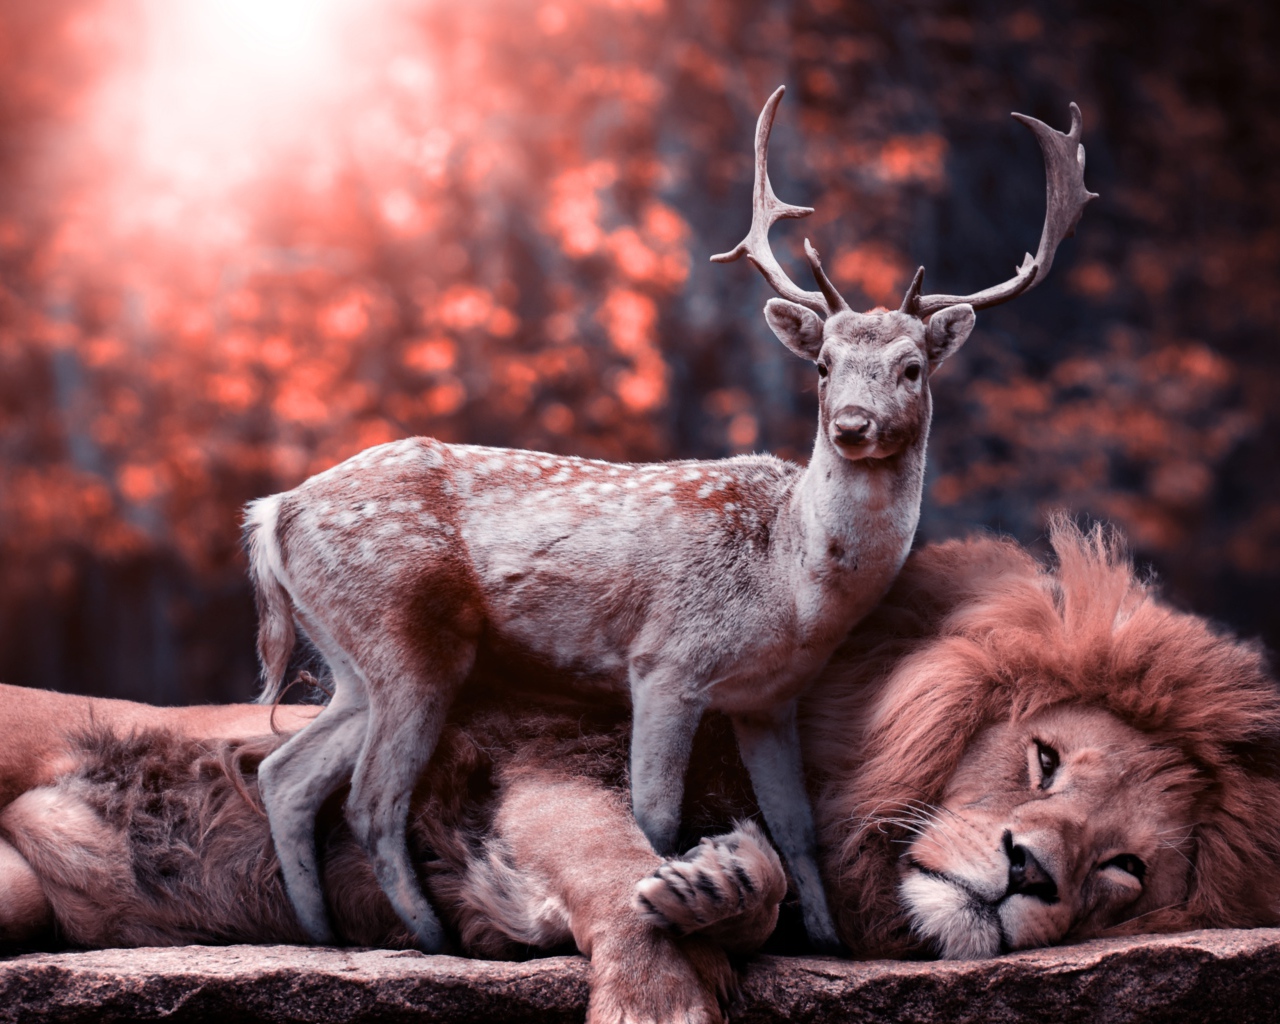 Big lion lies on the ground with a deer